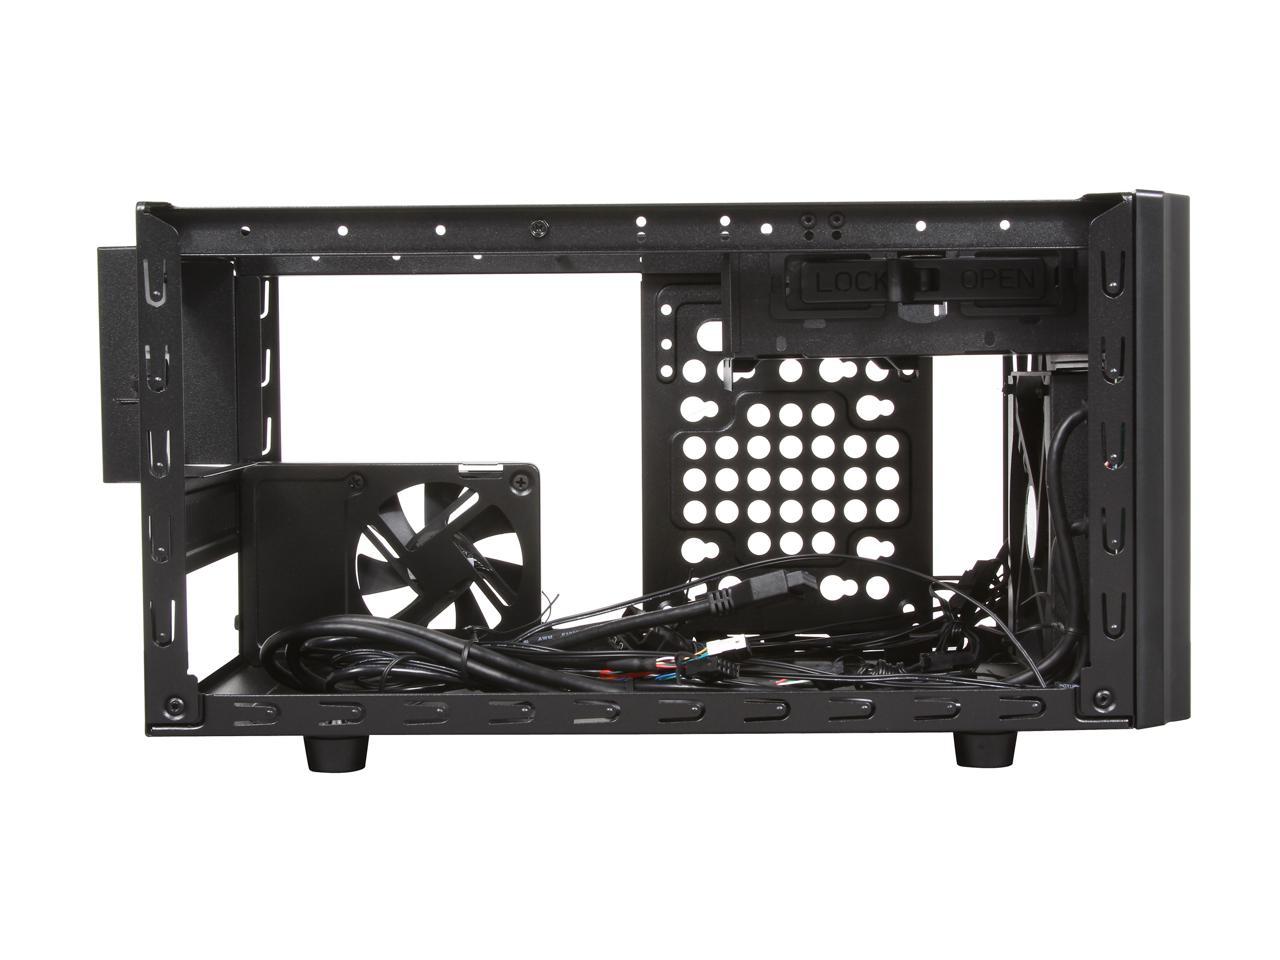 Cooler Master RC-130-KKN1 Elite 130 Mini-ITX Computer Case with Mesh Front Panel and Water Cooling Support 